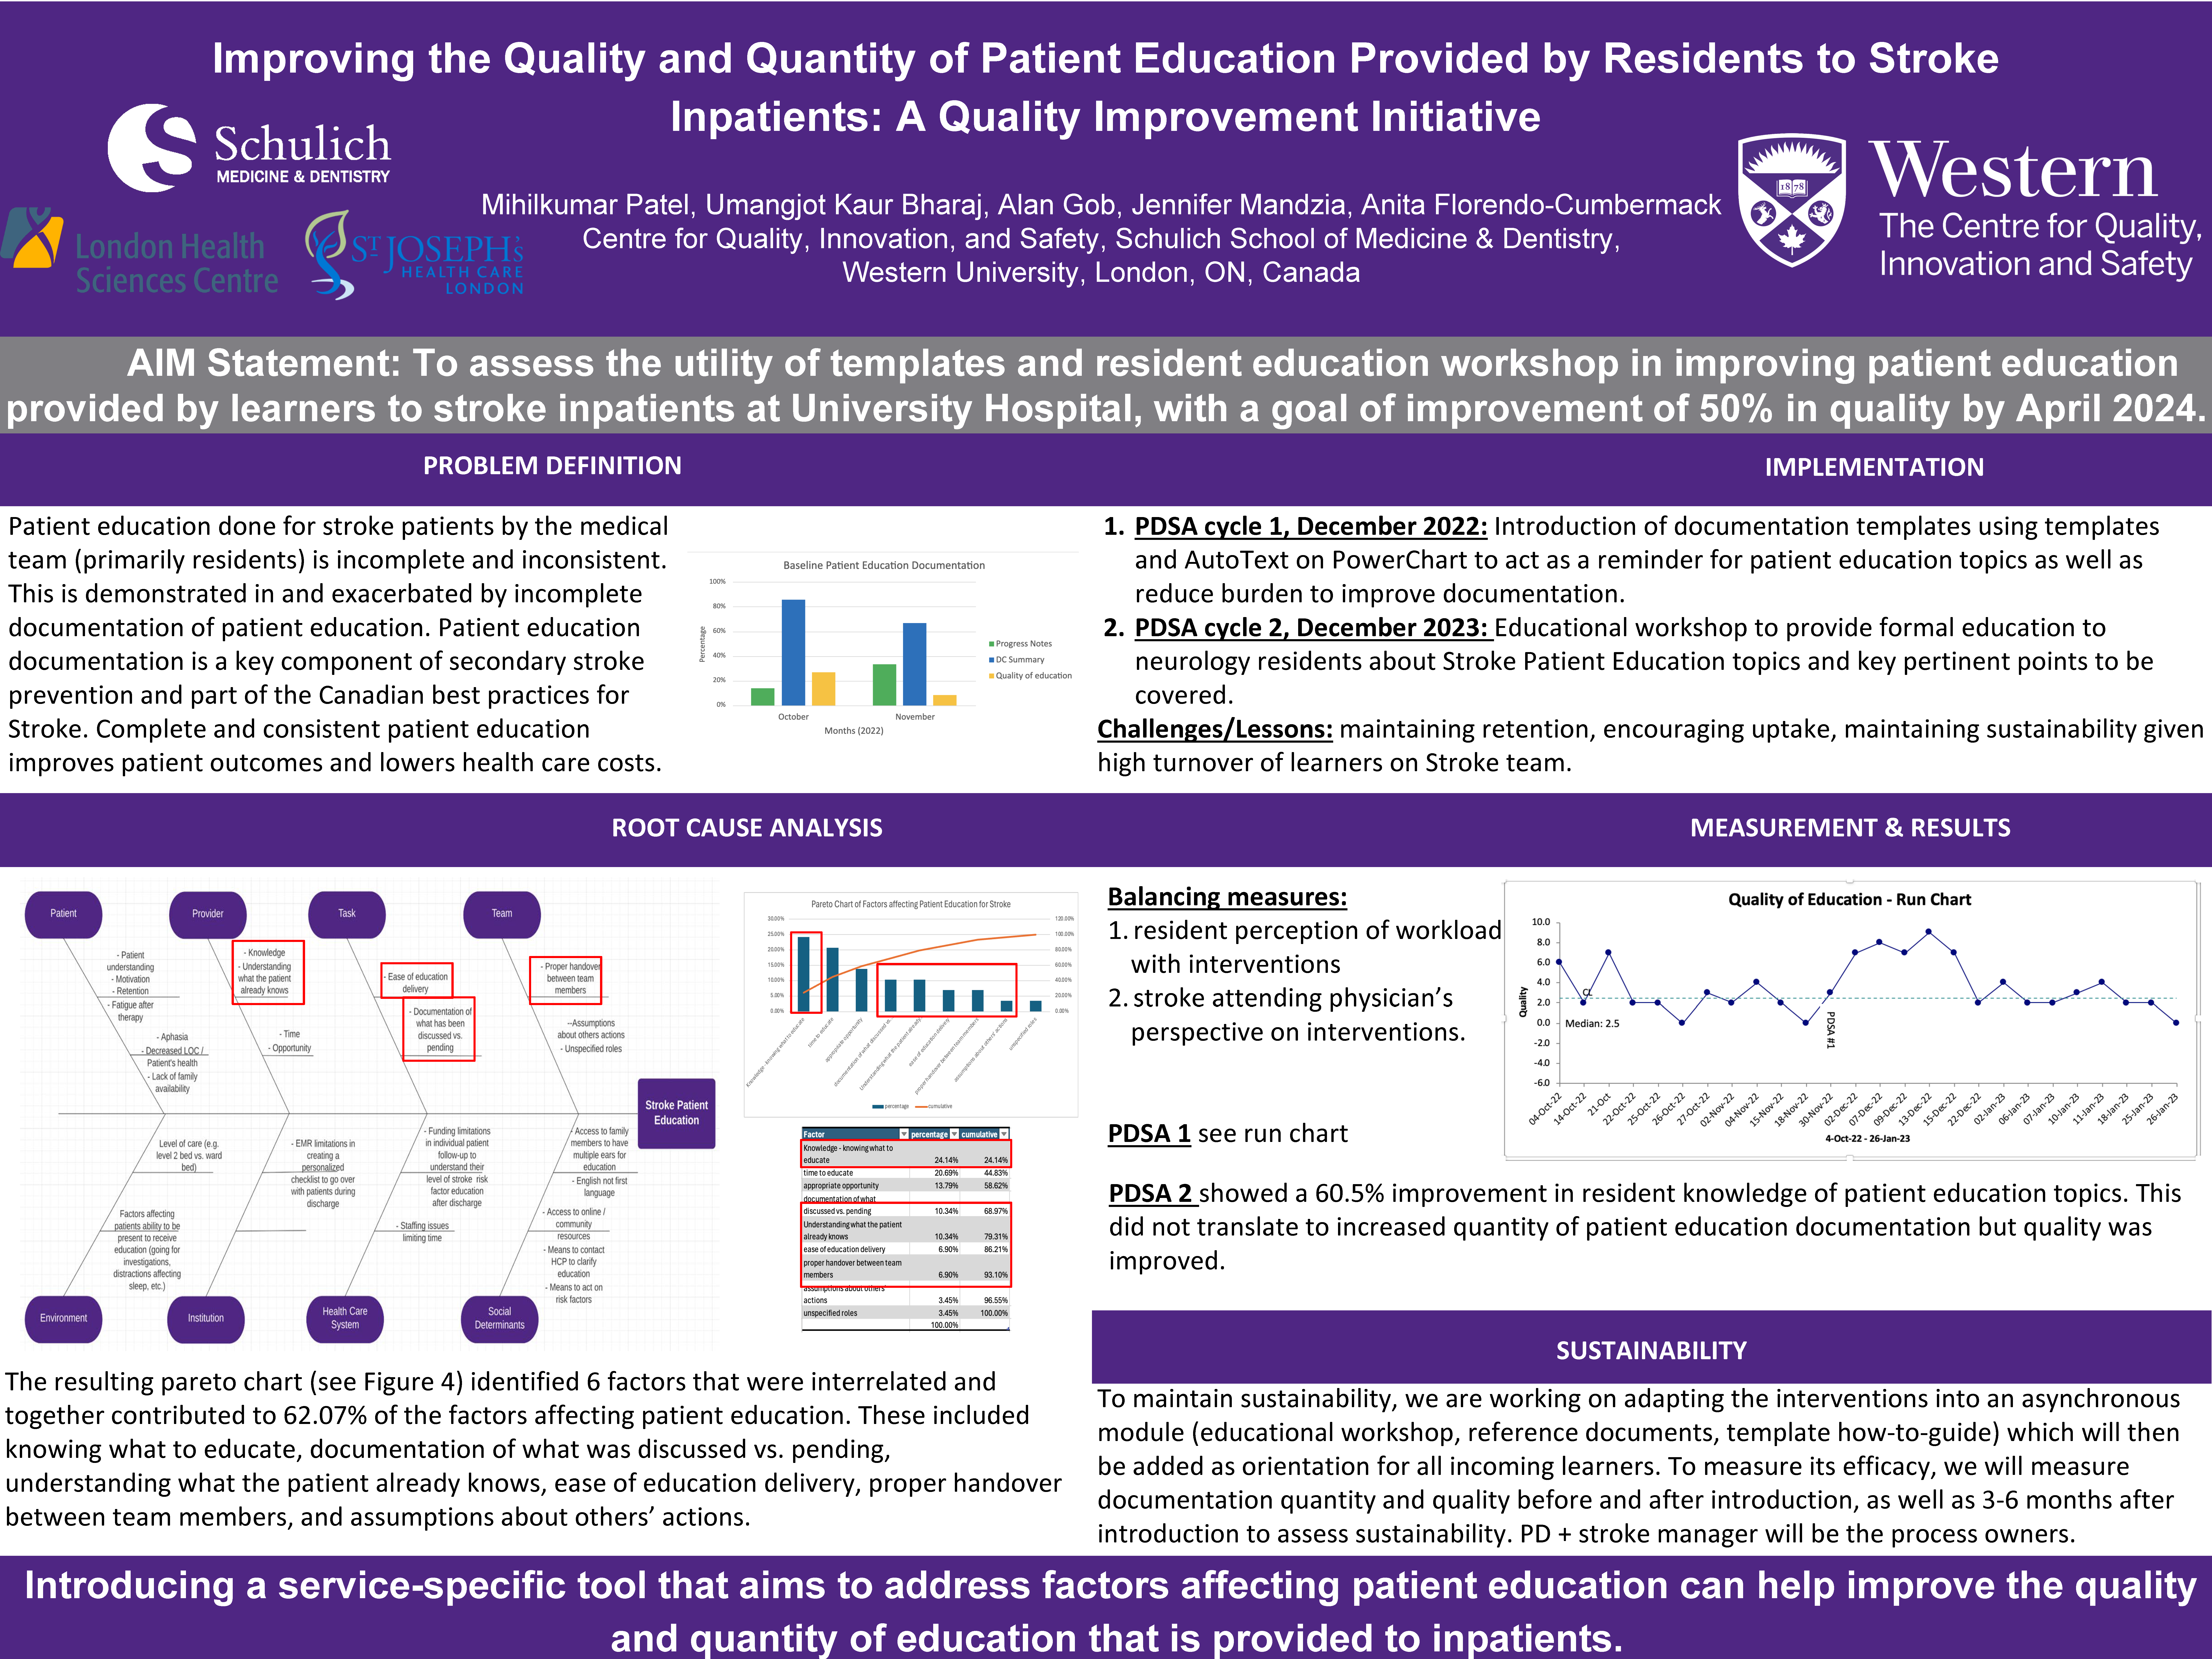 BISQ_2023-2024_Improving_the_Quality_and_Quantity_of_Patient_Education_Provided_by_Residents_to_Stroke_Inpatients:_A_Quality_Improvement_Initiative_Poster.png